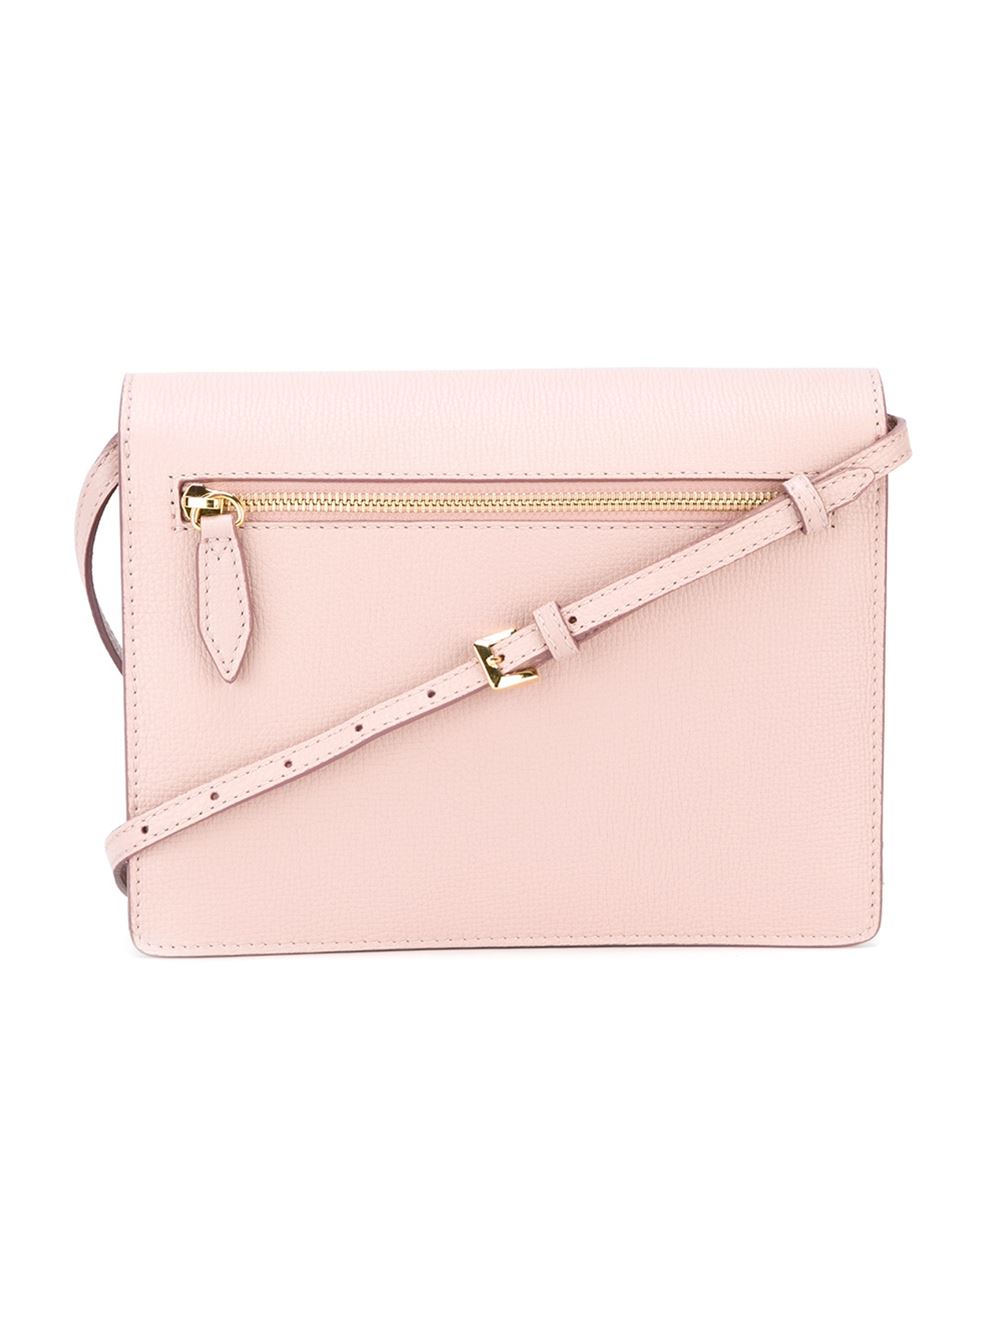 Lyst - Burberry House Check Crossbody Bag in Pink